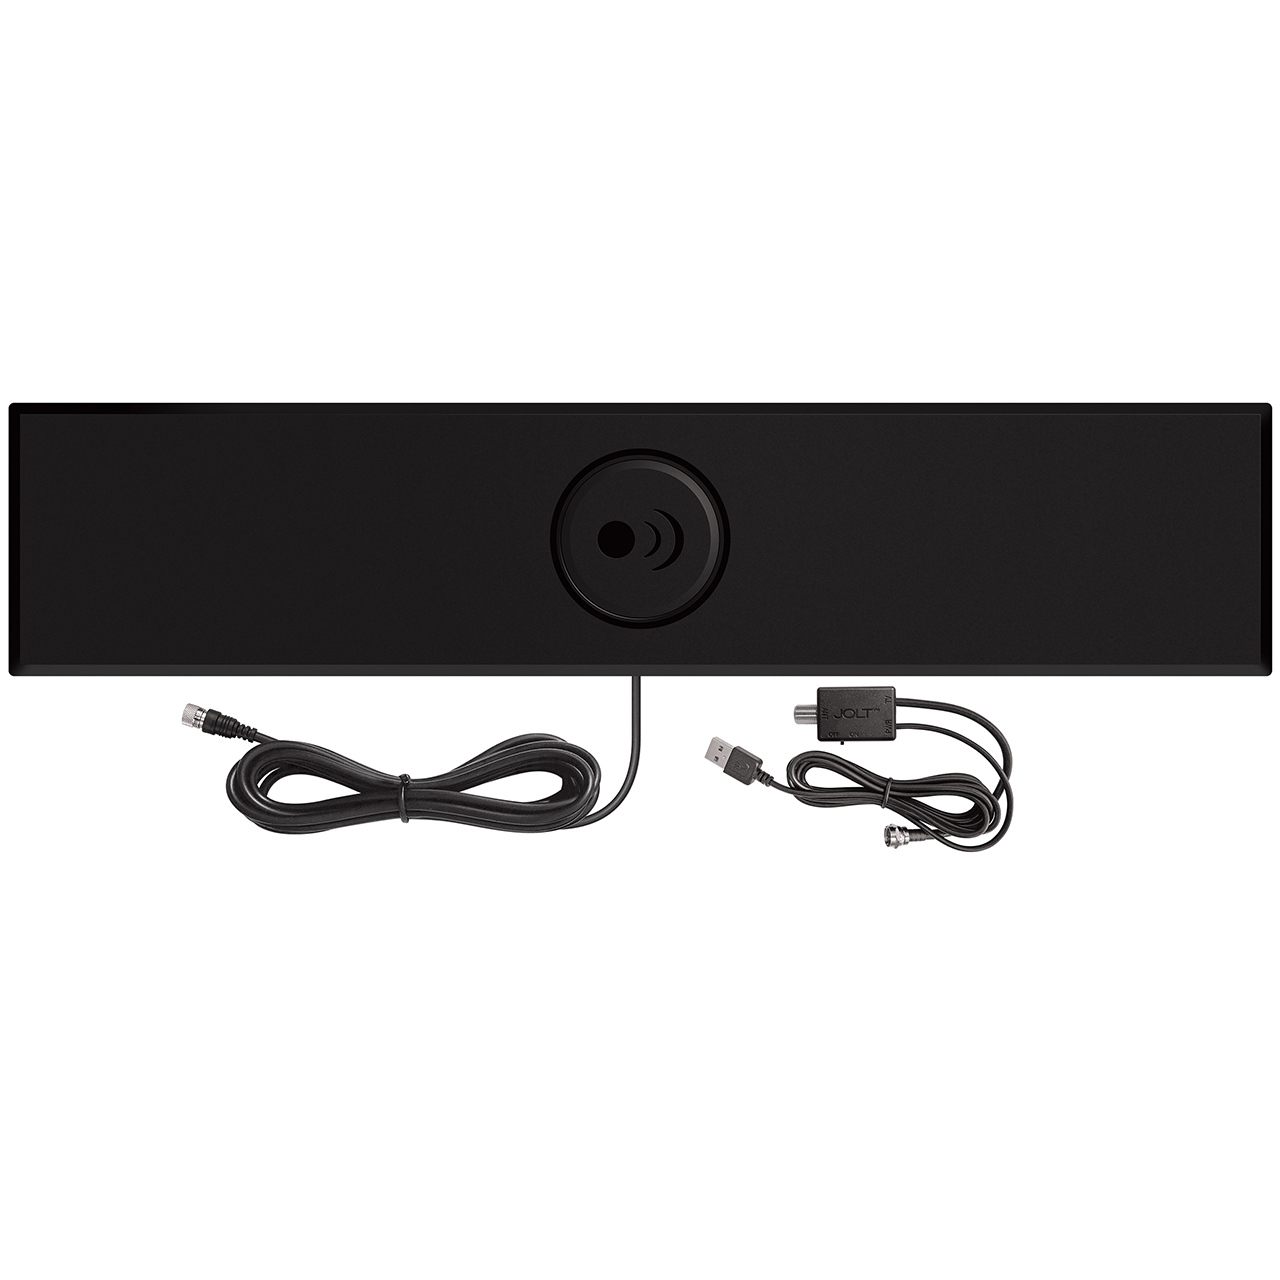 ClearStream Horizon Amplified Indoor HDTV Antenna with Coaxial Cable